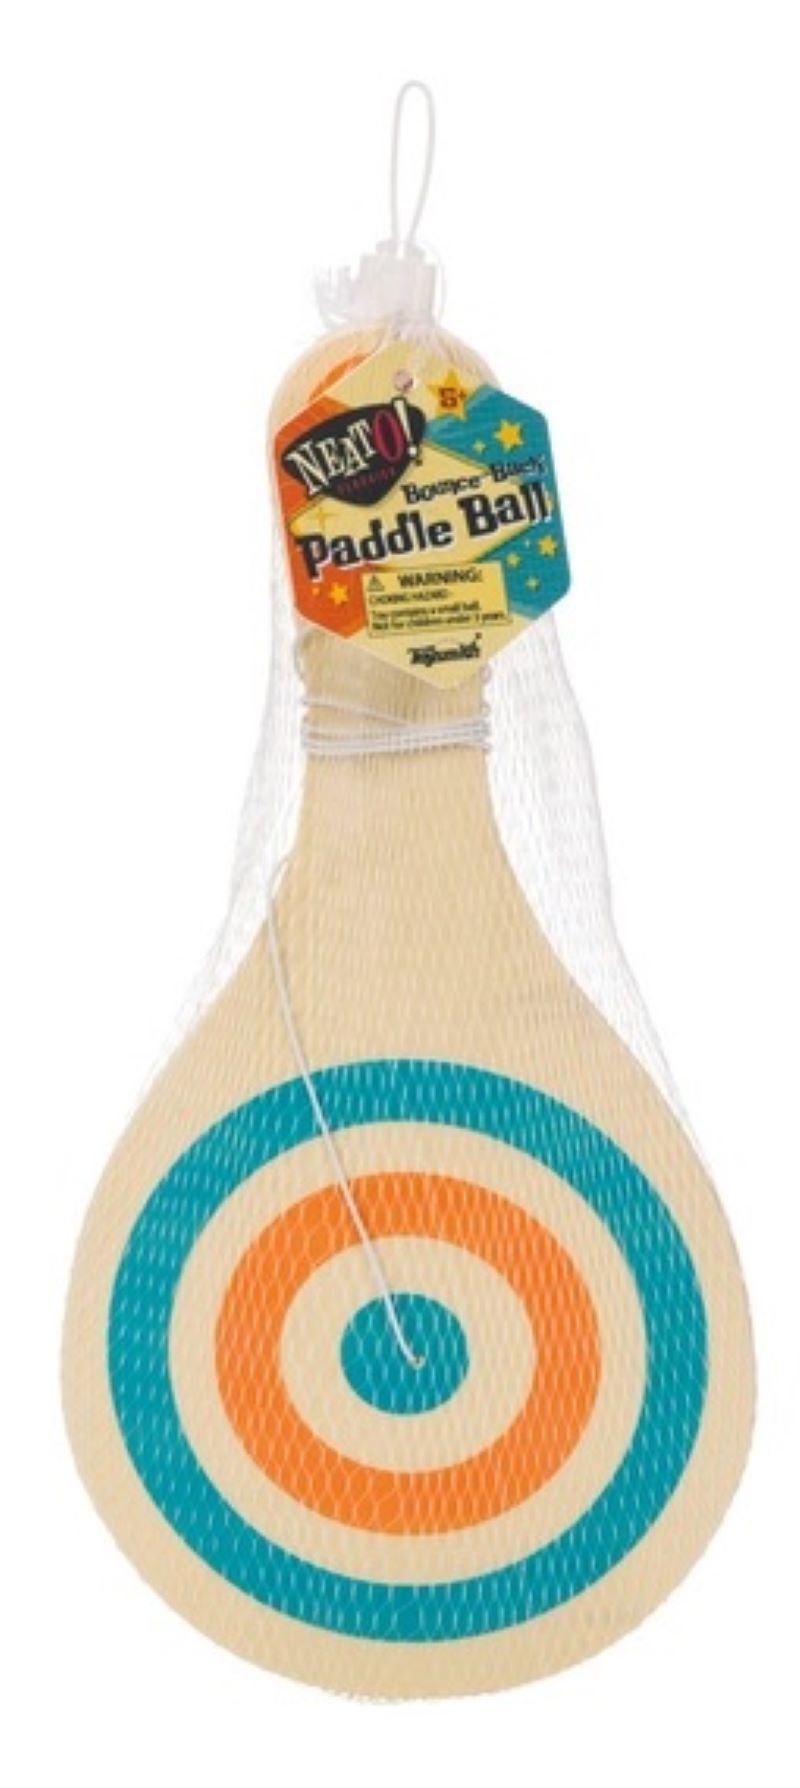 Bounce Back Paddle Ball Game - Retro Game That Brings Back Memories!